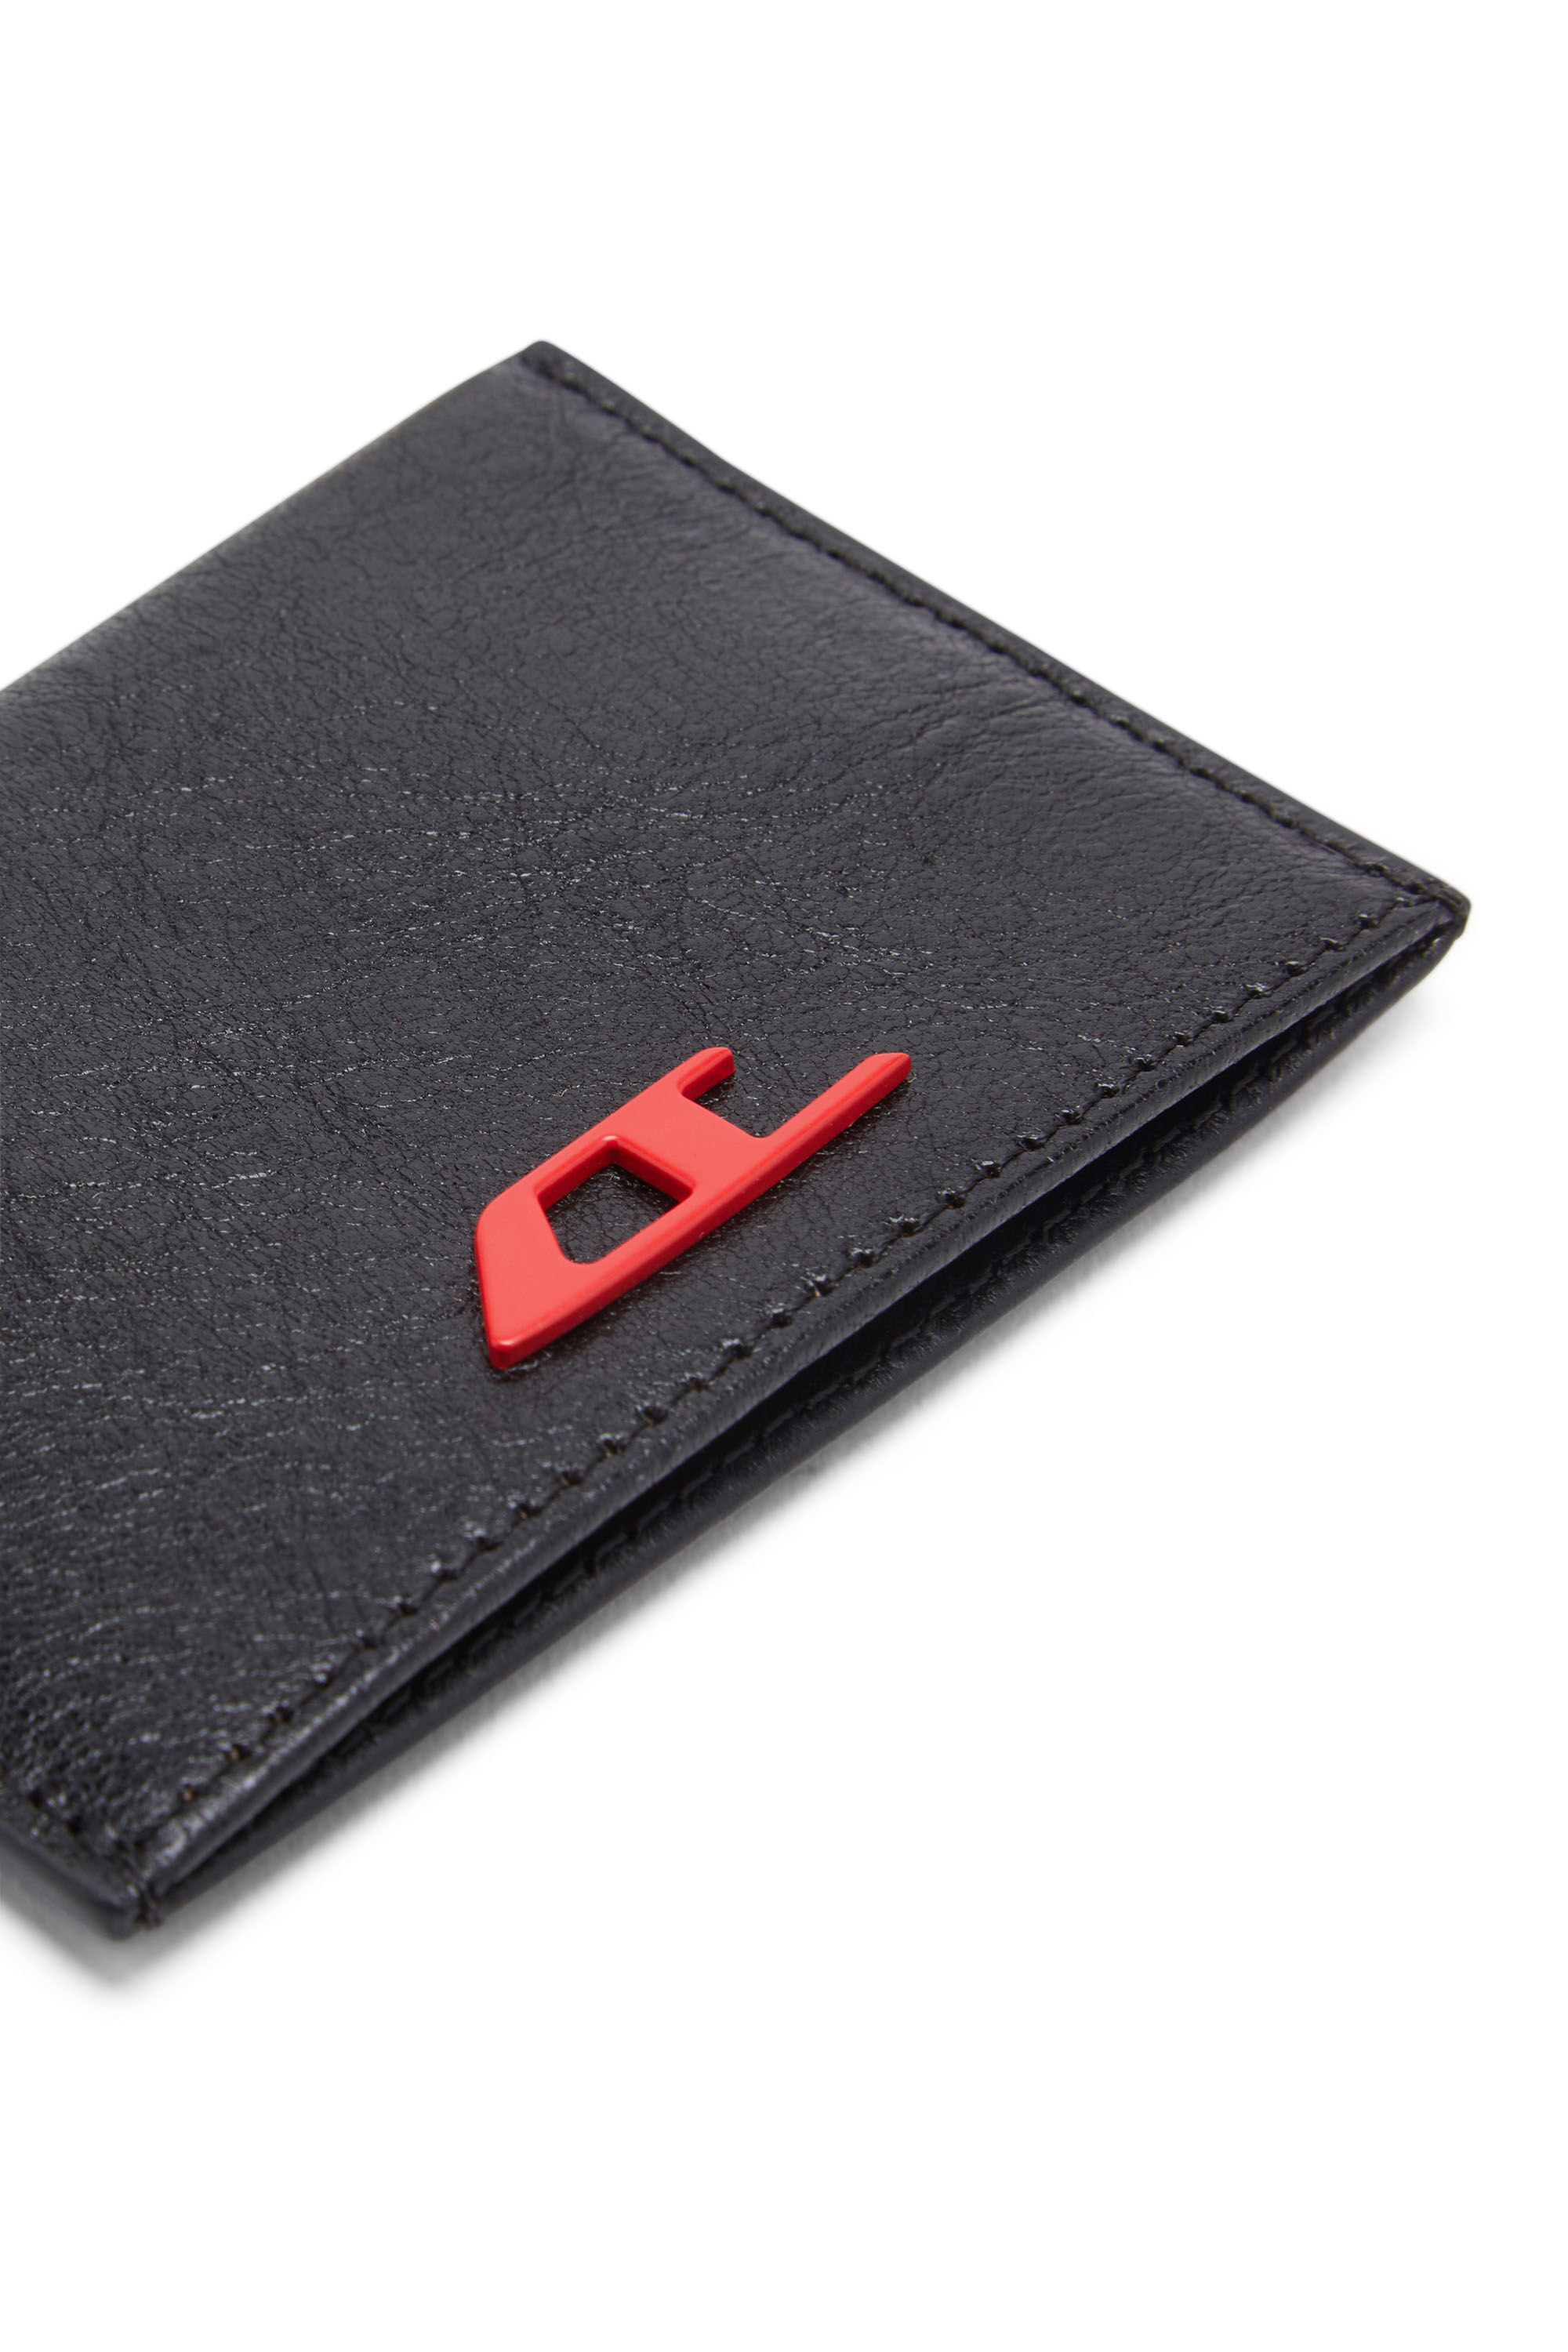 RAVE BI-FOLD COIN S Leather bi-fold wallet with red D plaque